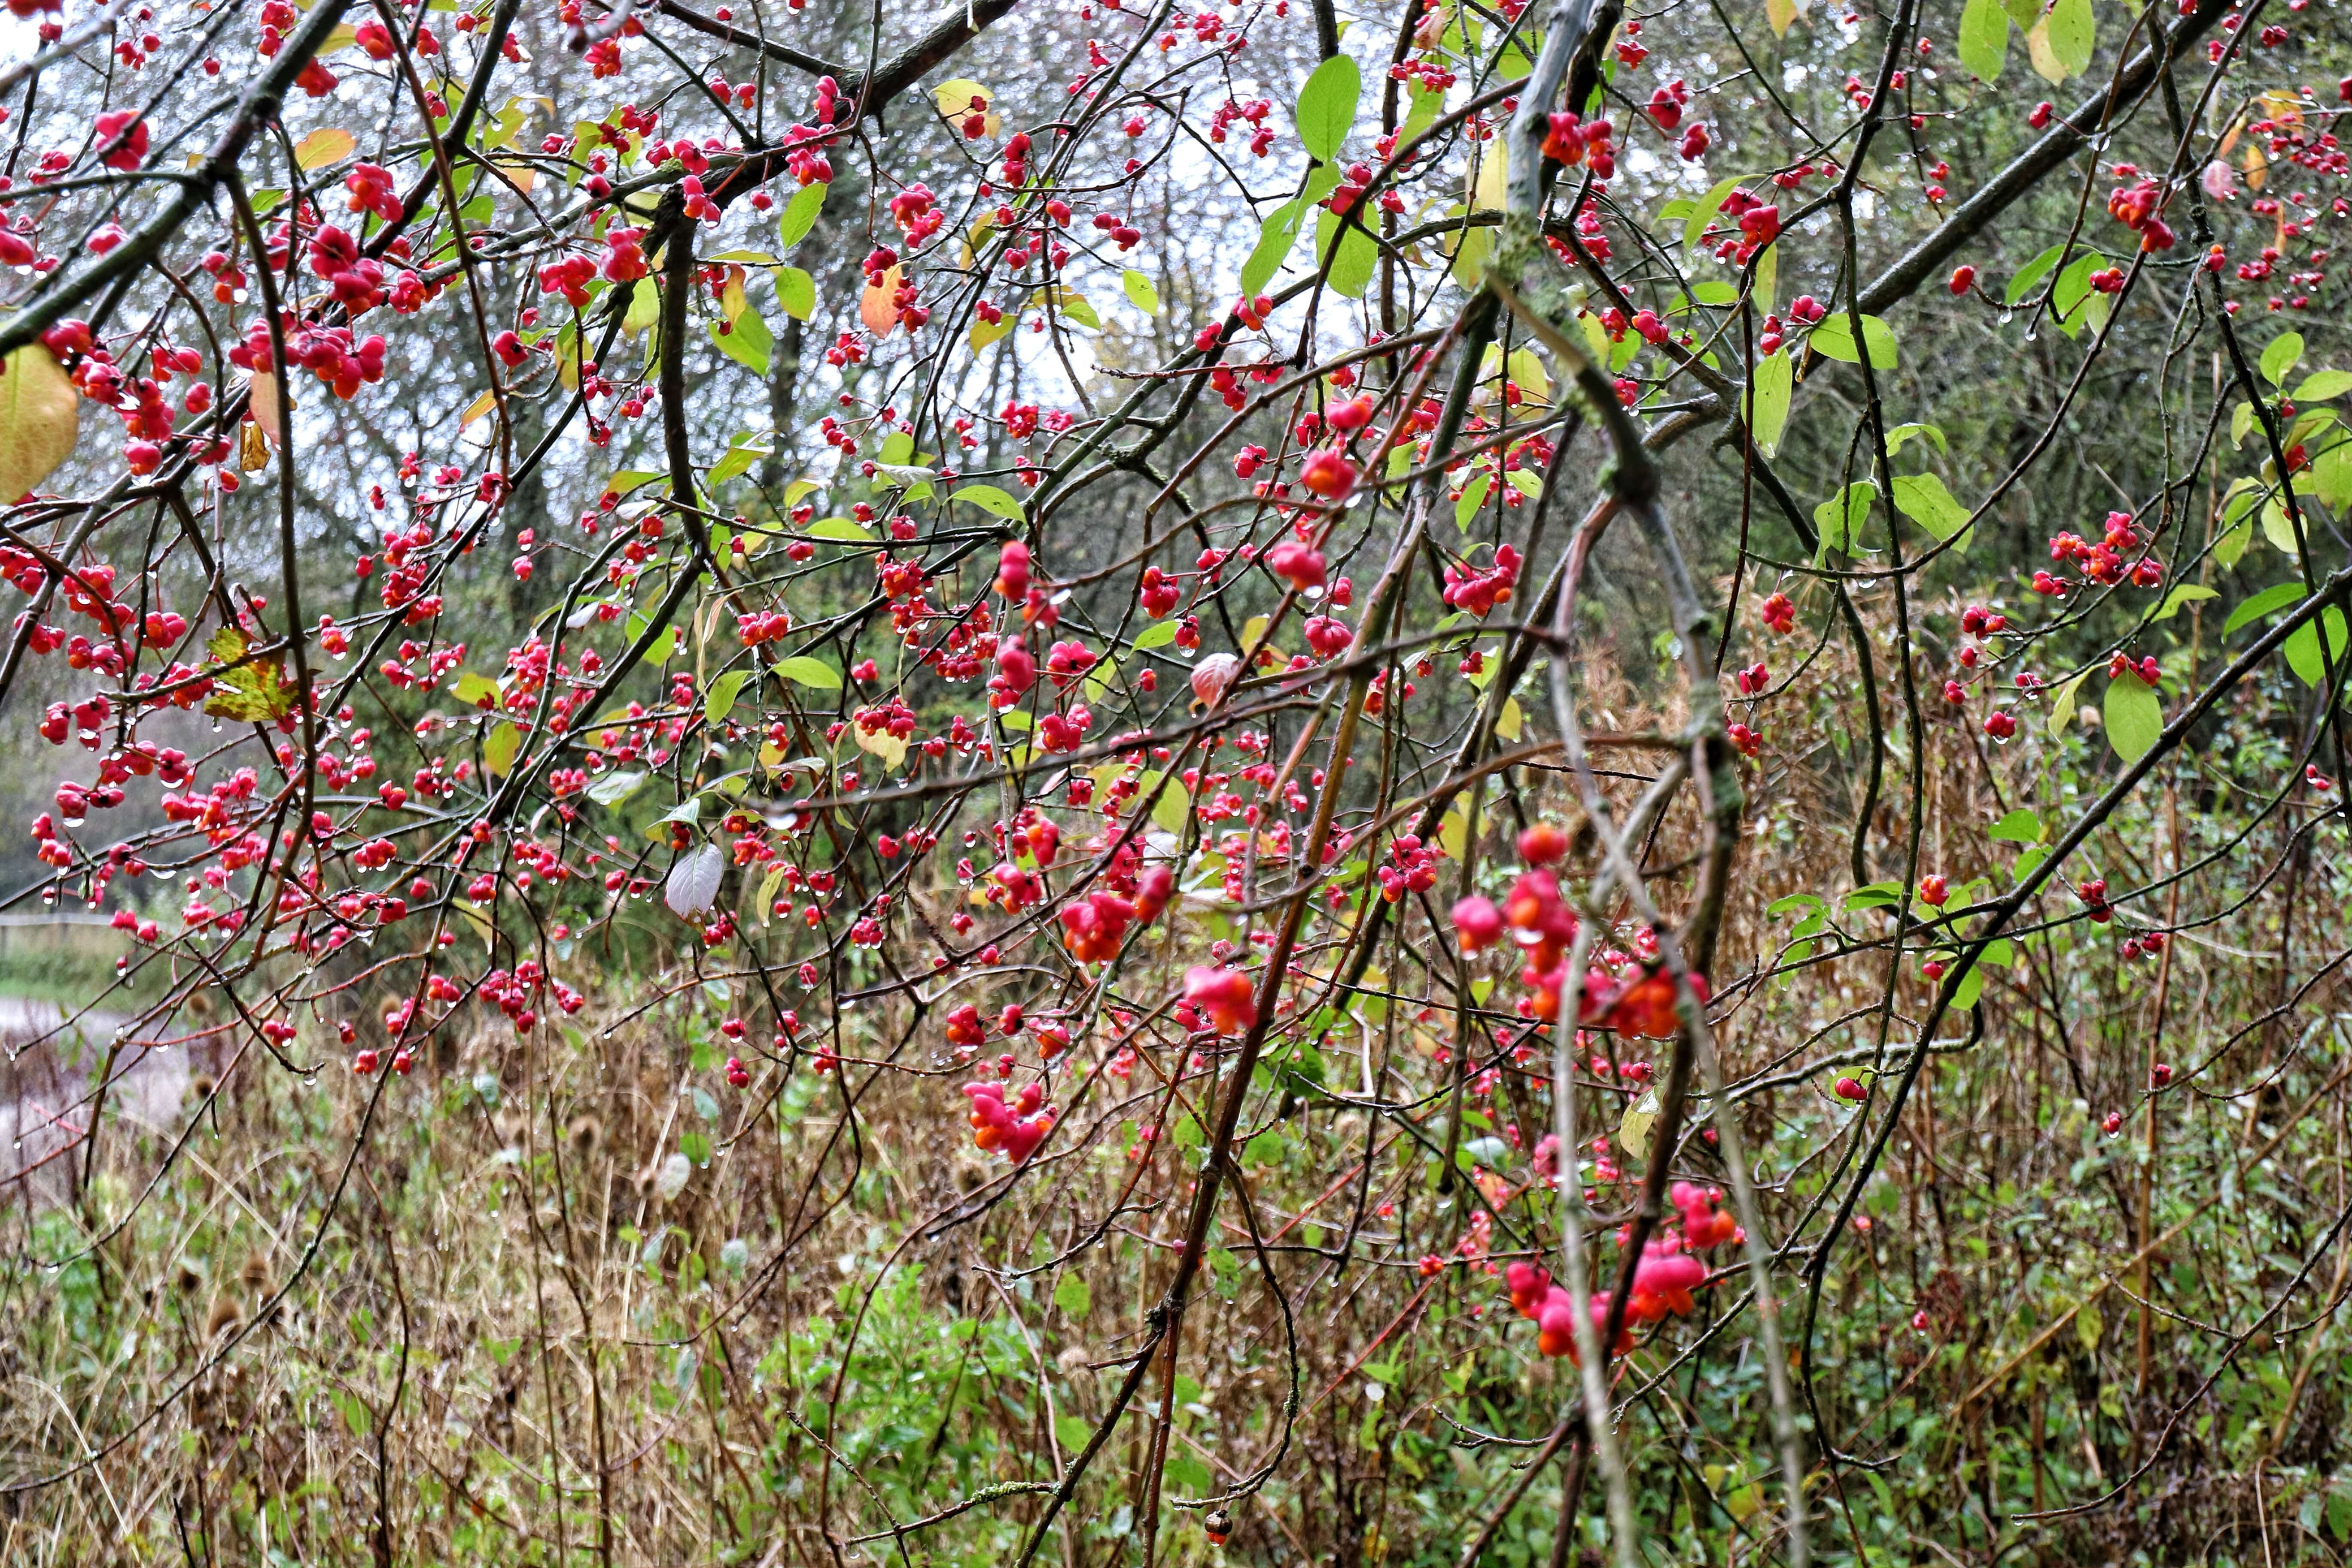 Bright red berries with rain dripping off them